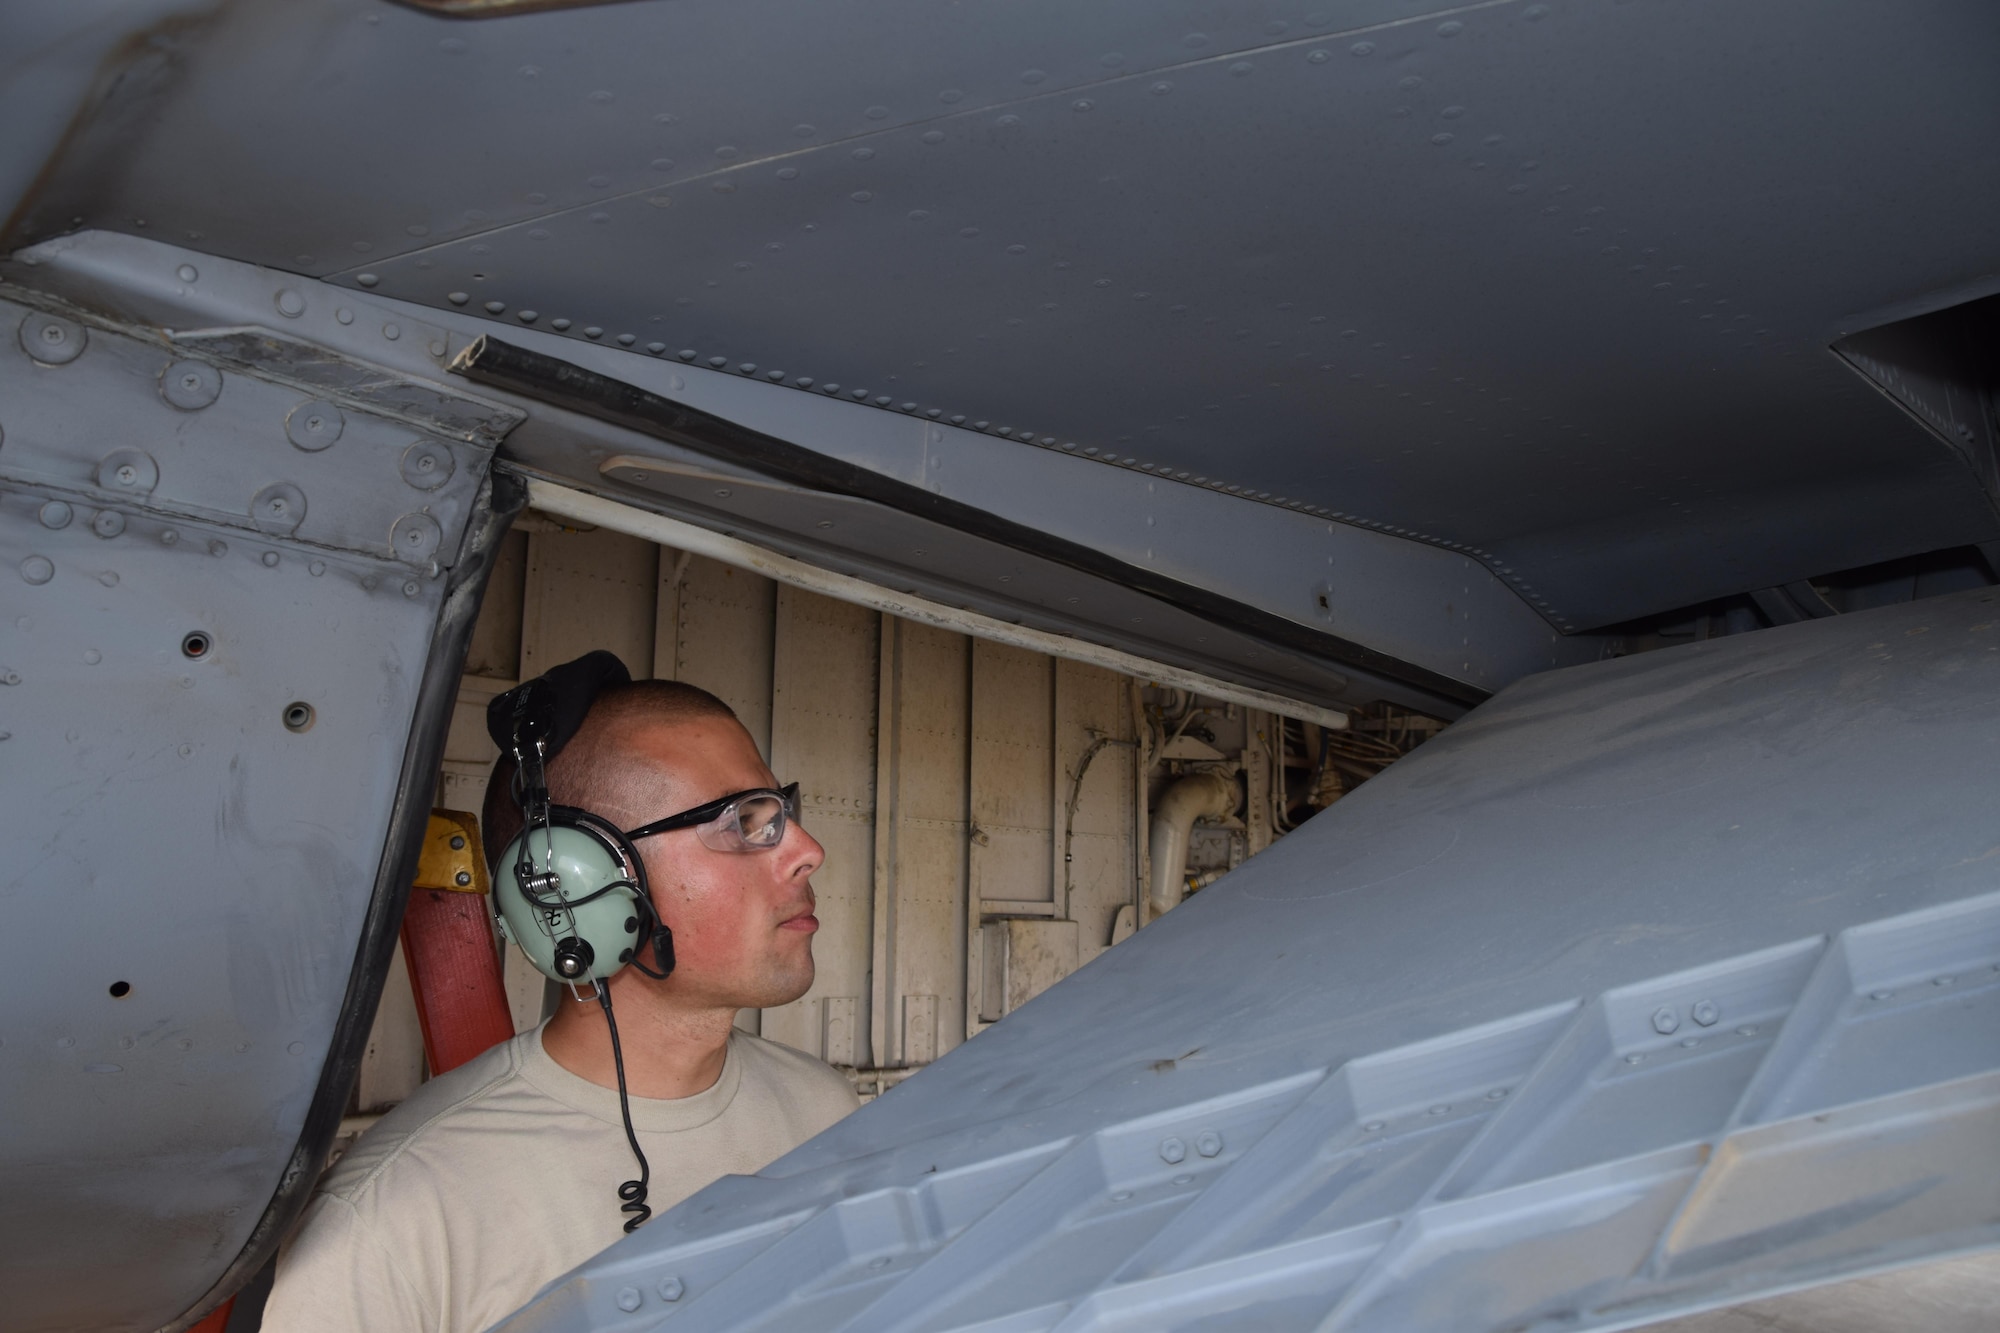 Senior Airman Peter Currier, a crew chief with the 340th Expeditionary Aircraft Maintenance Unit, checks the flaps on a KC-135 Stratotanker June 1, 2016, at Al Udeid Air Base, Qatar. Airmen from the 340th AMU work with more than 60 coalition partners in support of Operation Inherent Resolve and other missions throughout the theater. Currier is stationed at Bangor Air National Guard Base in Bangor, Maine. (U.S. Air Force photo by Technical Sgt. Carlos J. Trevino/Released)